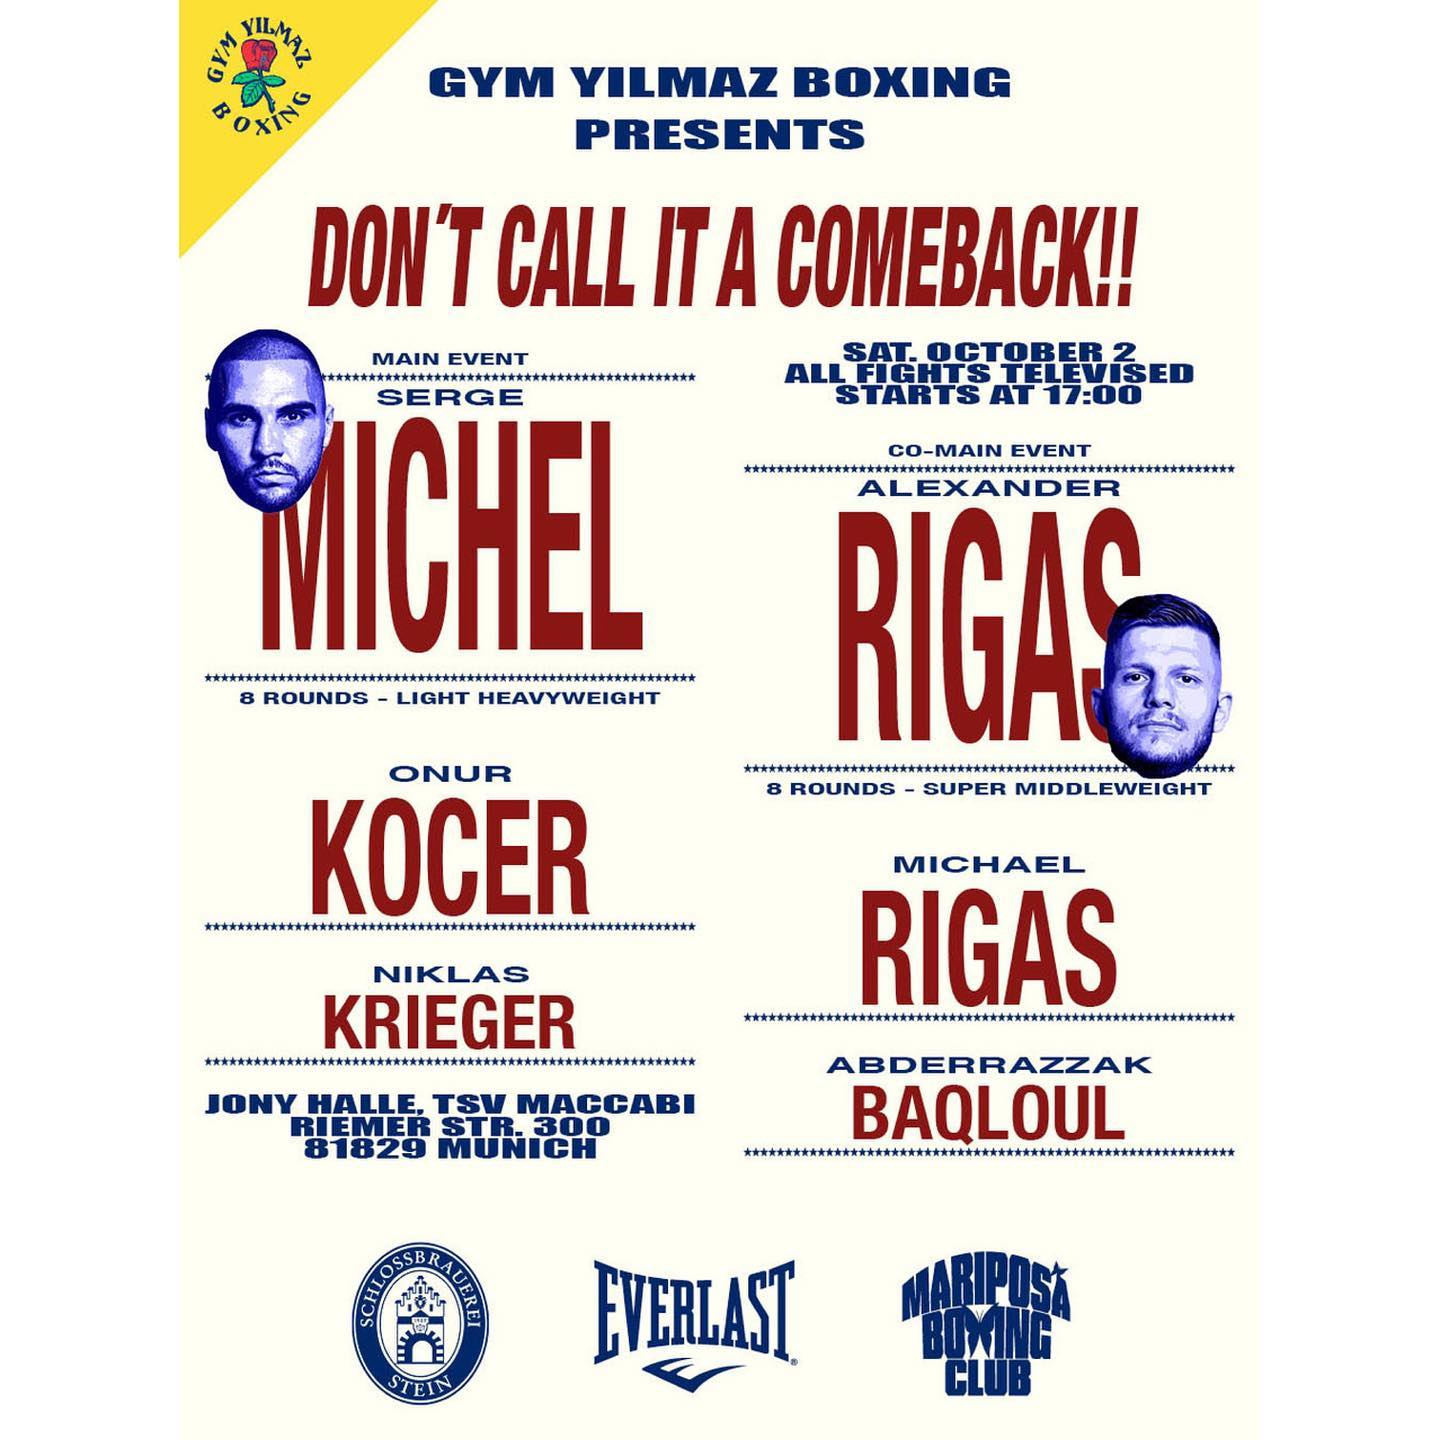 Yilmaz Boxing - Dont Call it a Comback